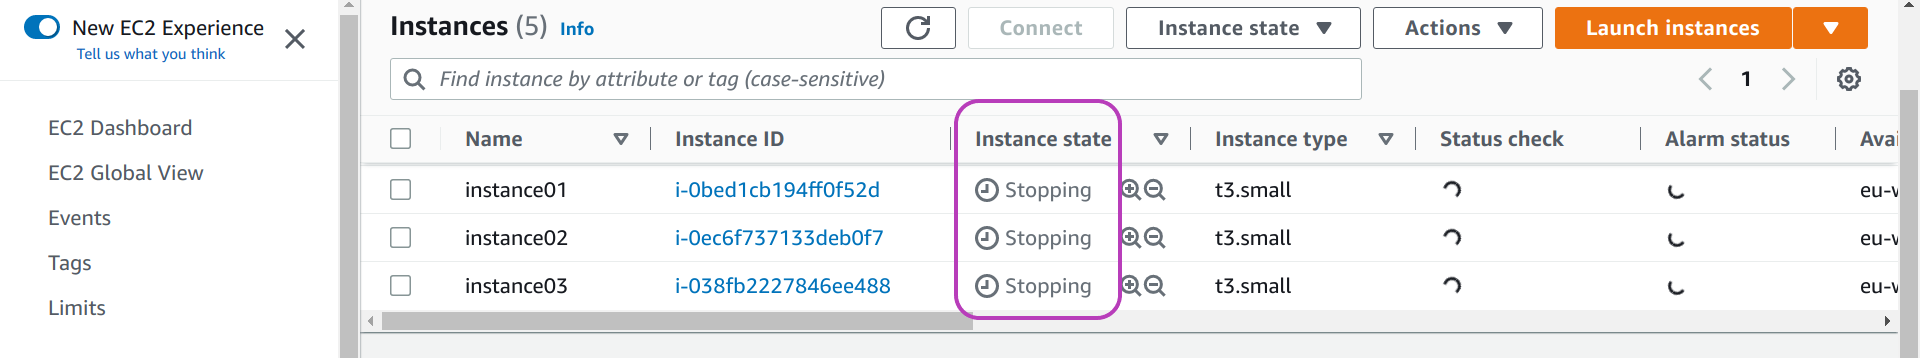 Screenshot of AWS Console EC2 Instances page in a browser showing the state, Stopping, of three instances previously created and running, circled.